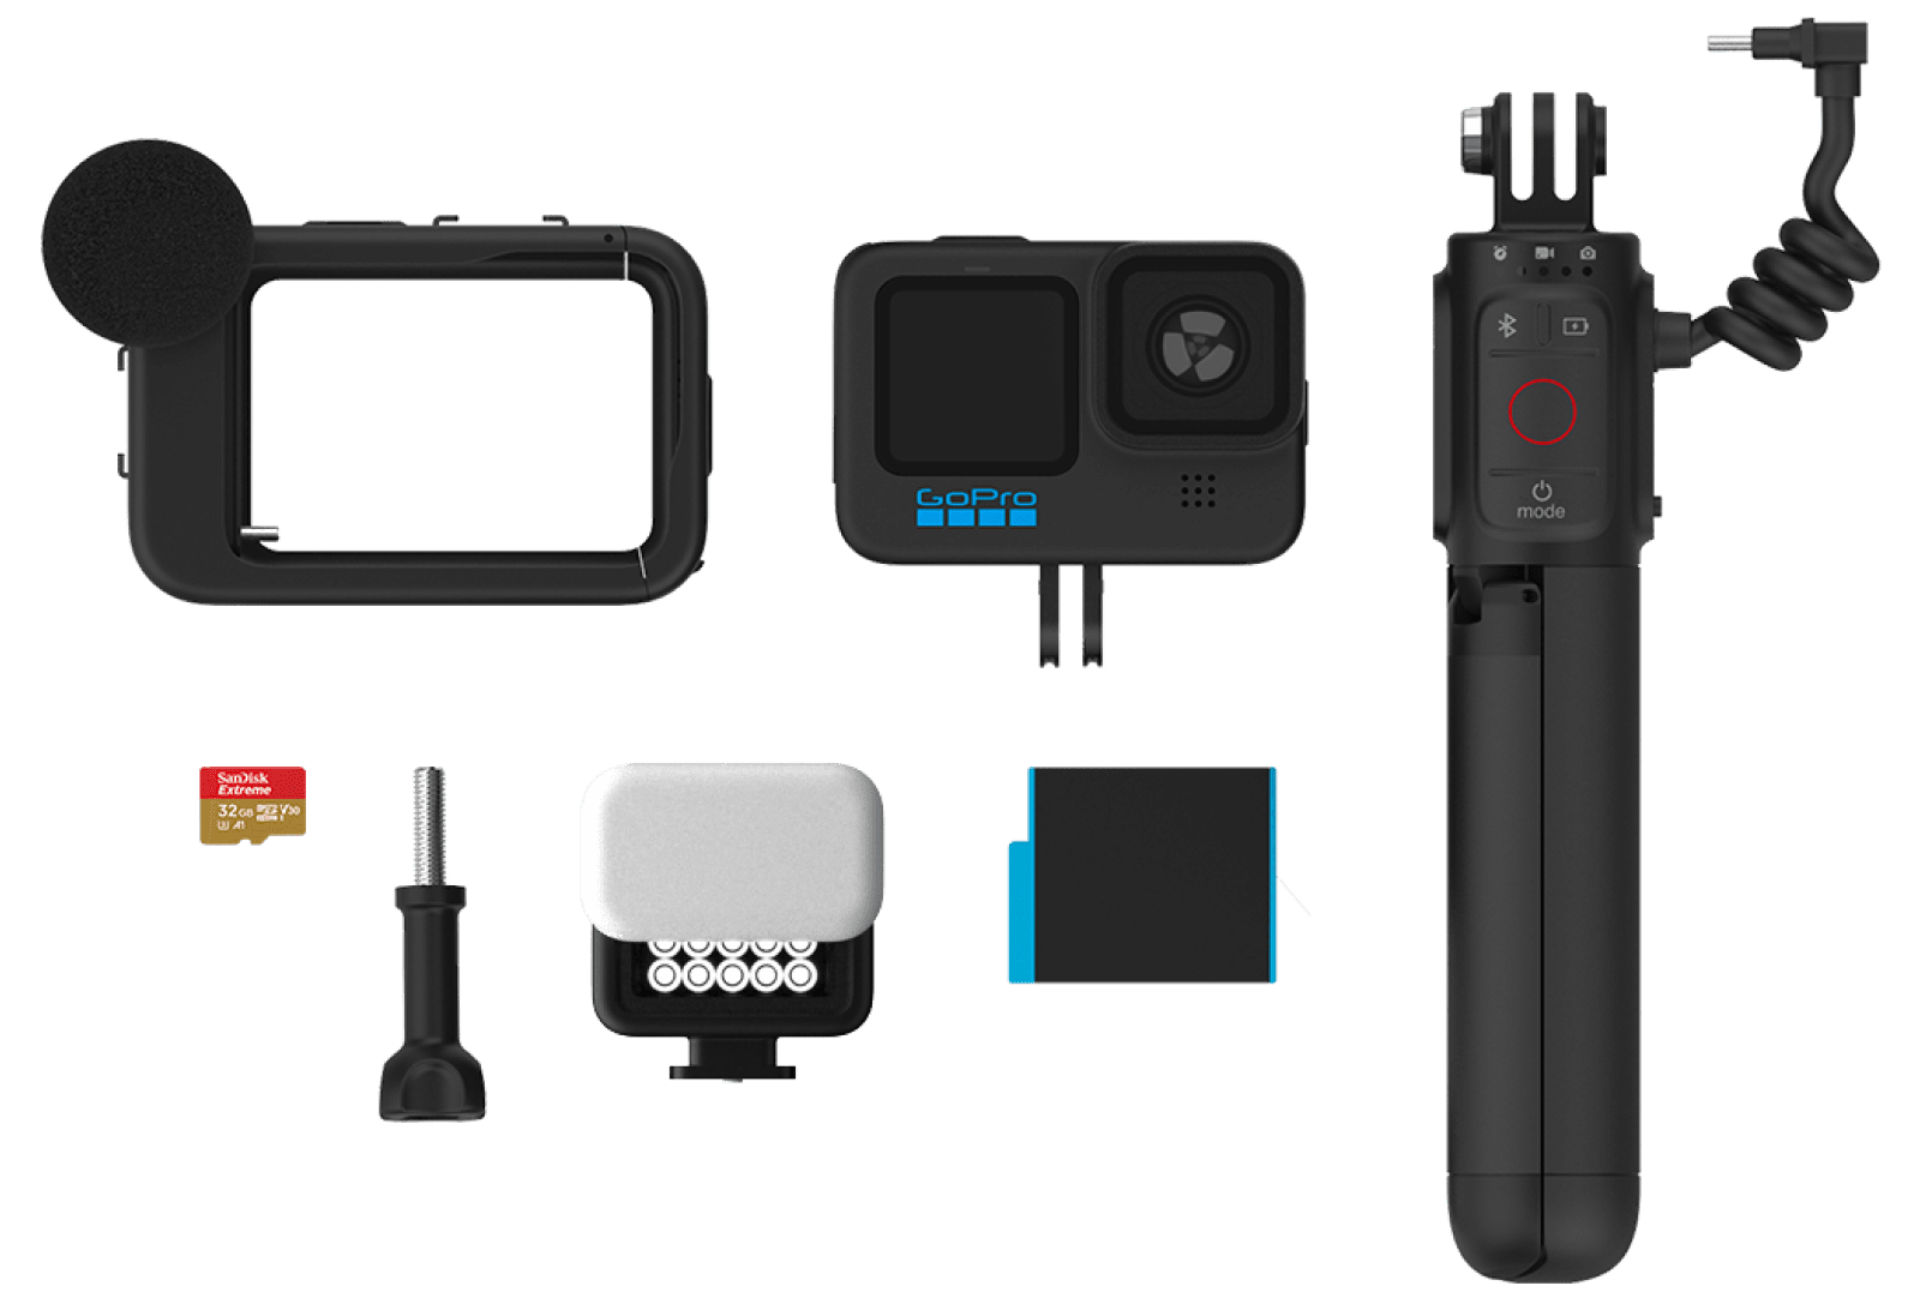 GoPro HERO10 Black Creator Edition Released – Everything You Need